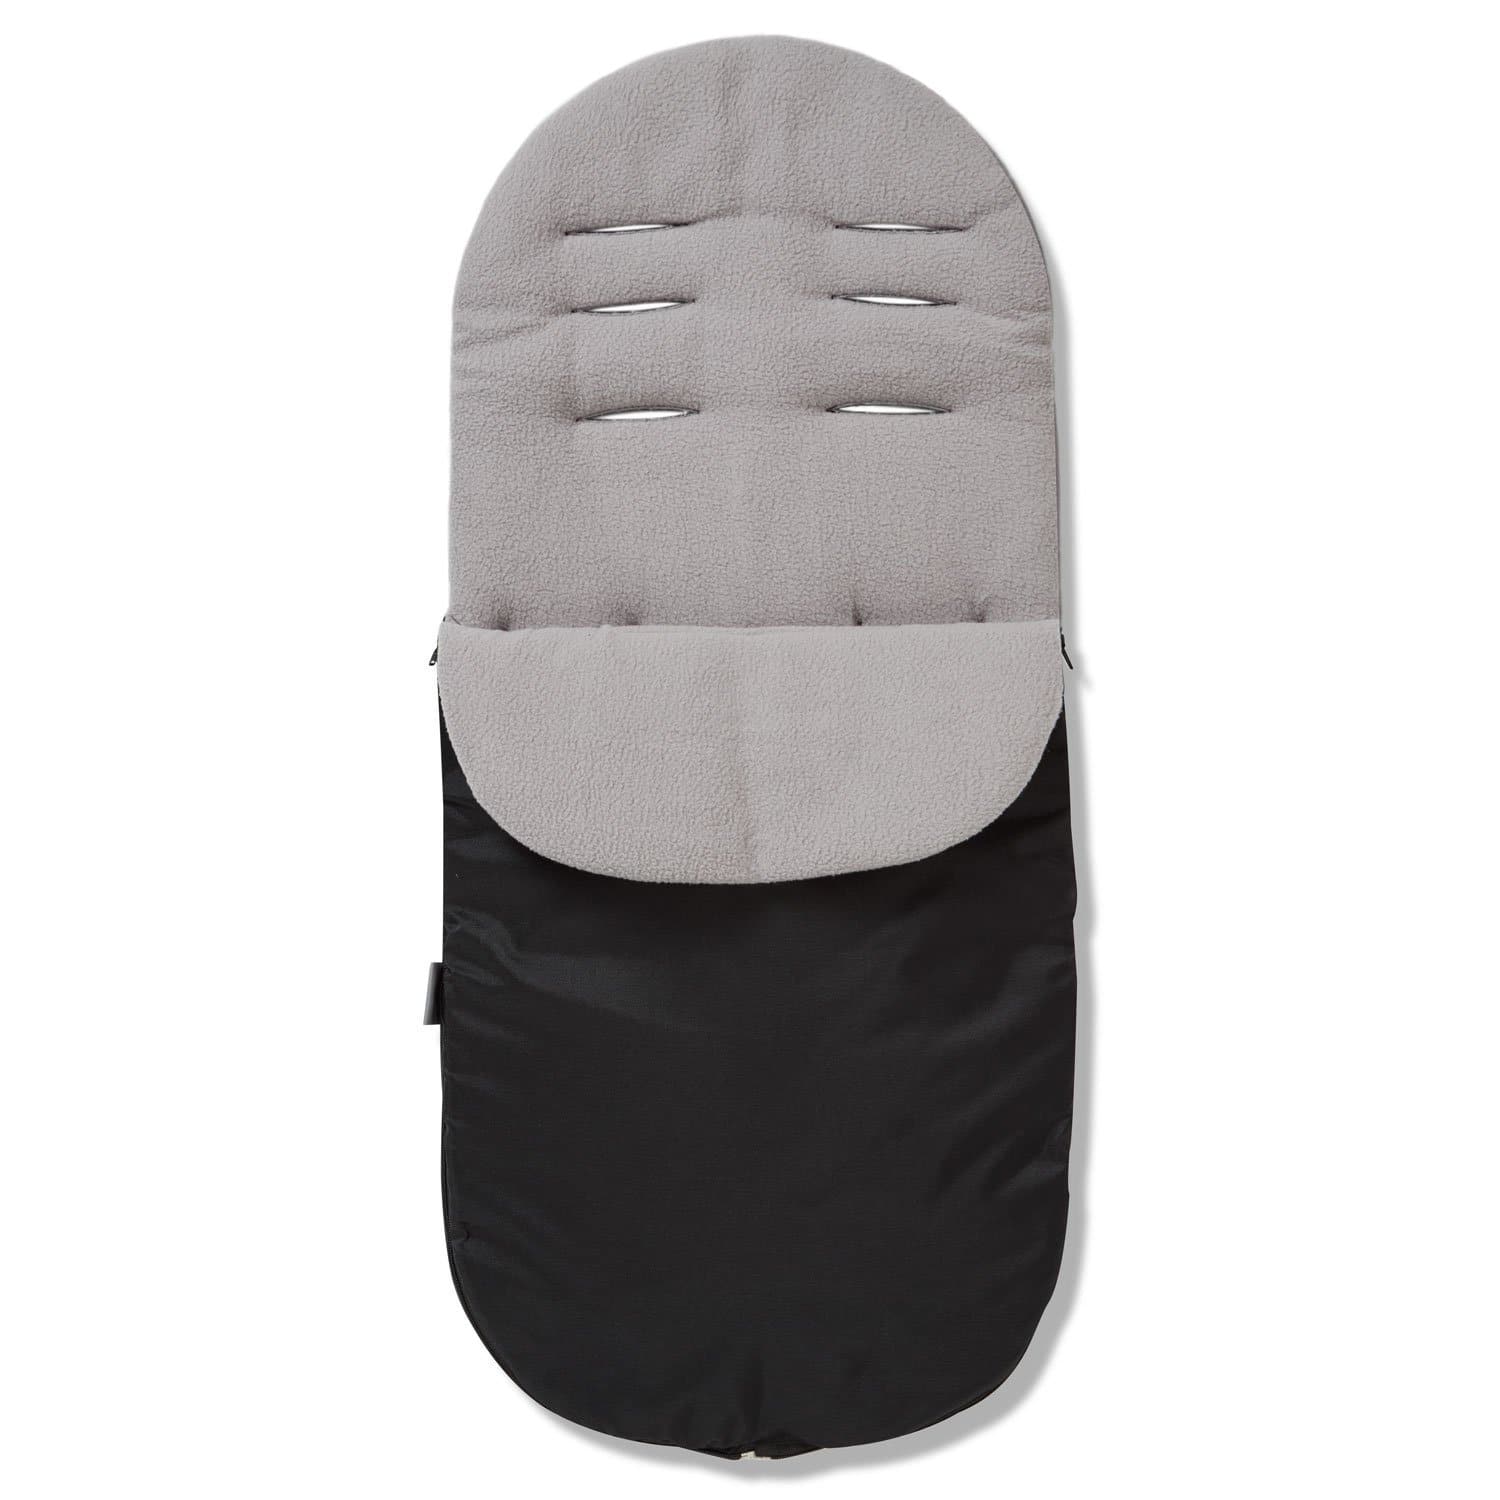 Footmuff / Cosy Toes Compatible with Joie - Grey / Fits All Models | For Your Little One